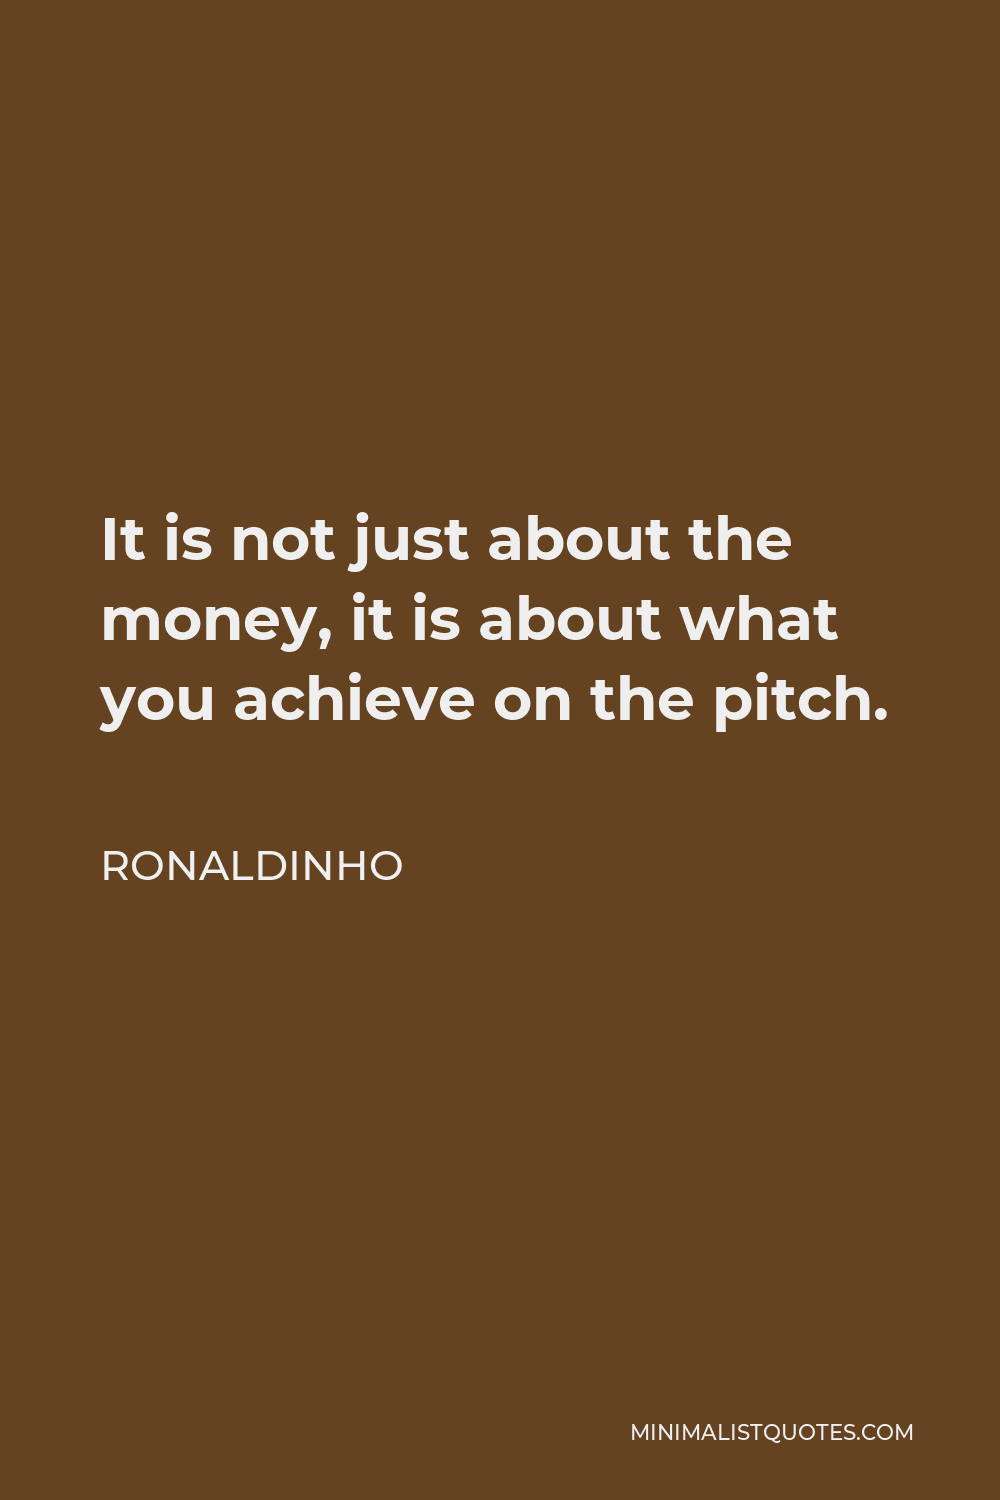 Ronaldinho Quote - It is not just about the money, it is about what you achieve on the pitch.